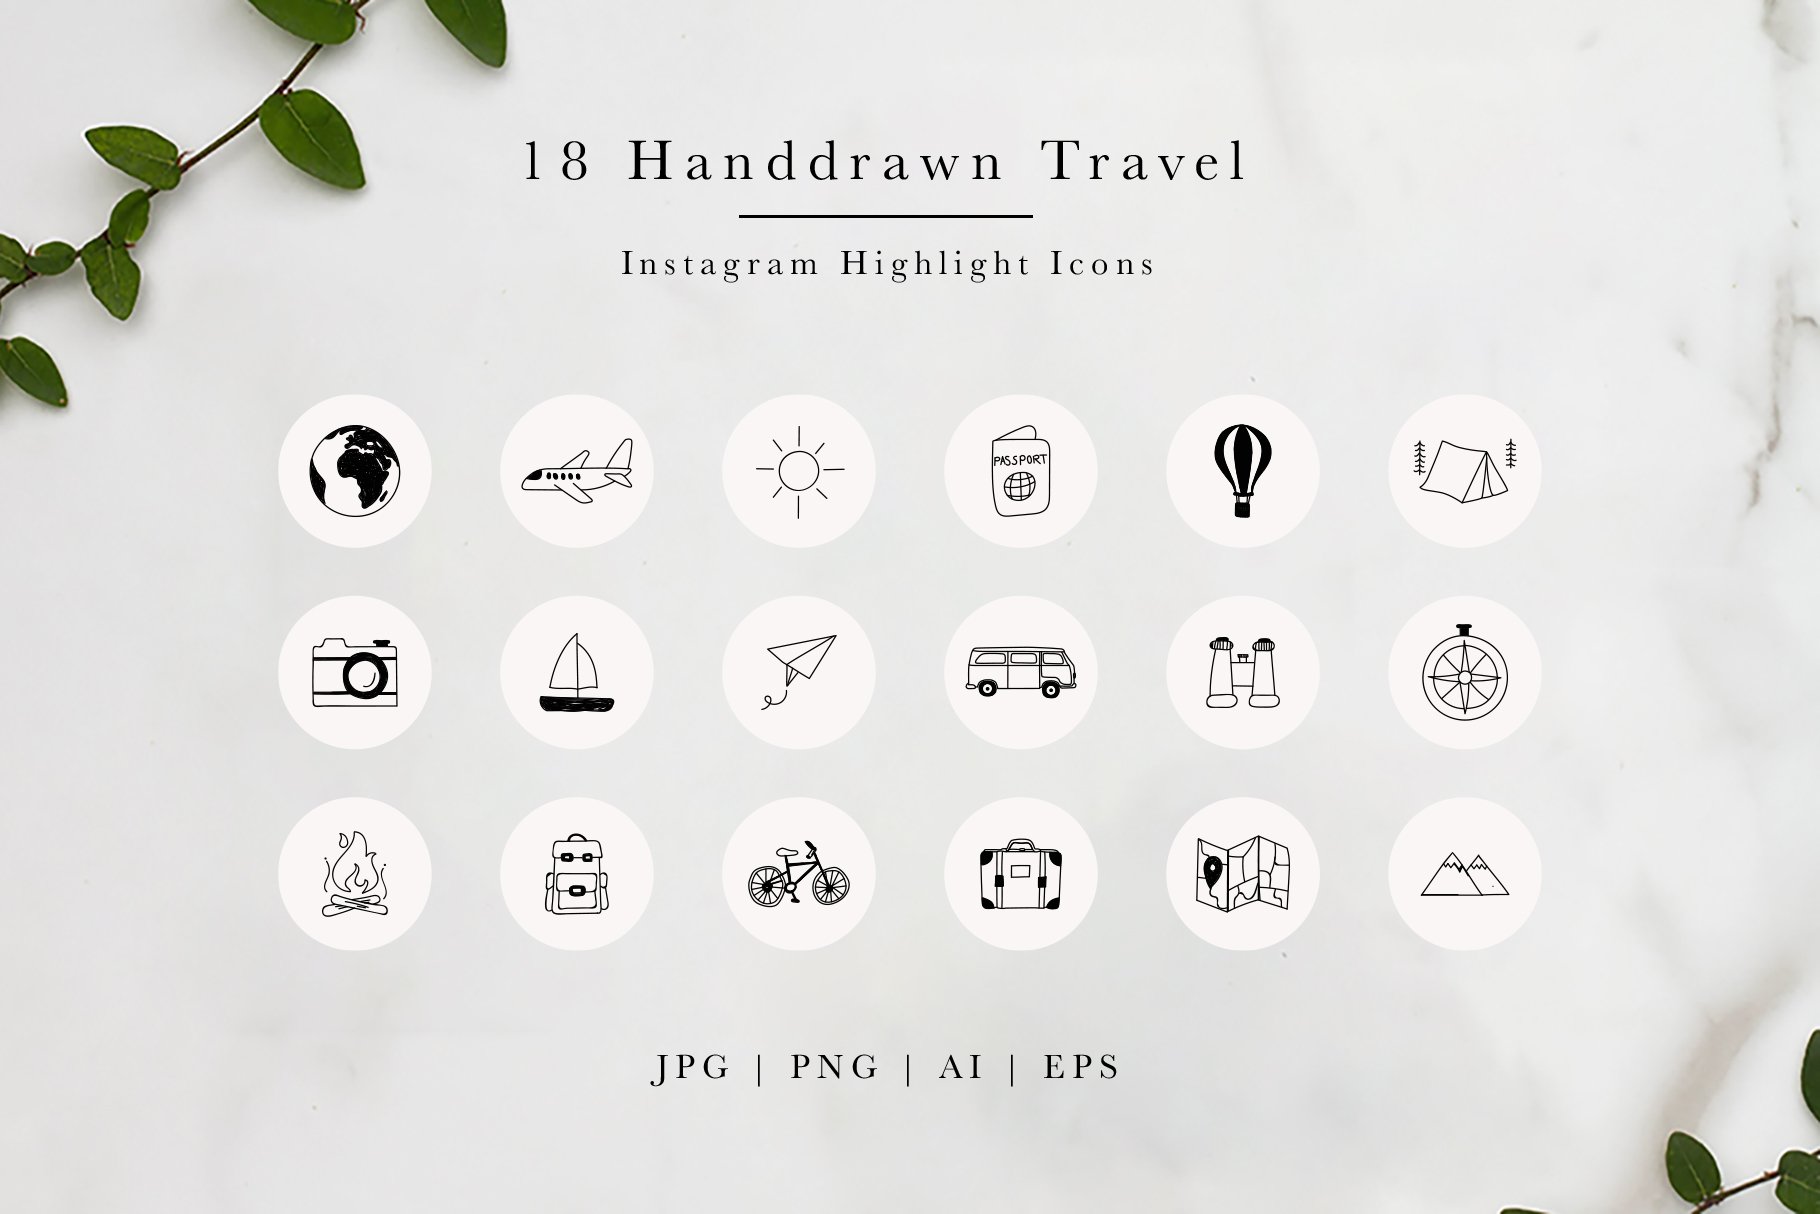 Travel Highlight Icons for Instagram preview image.